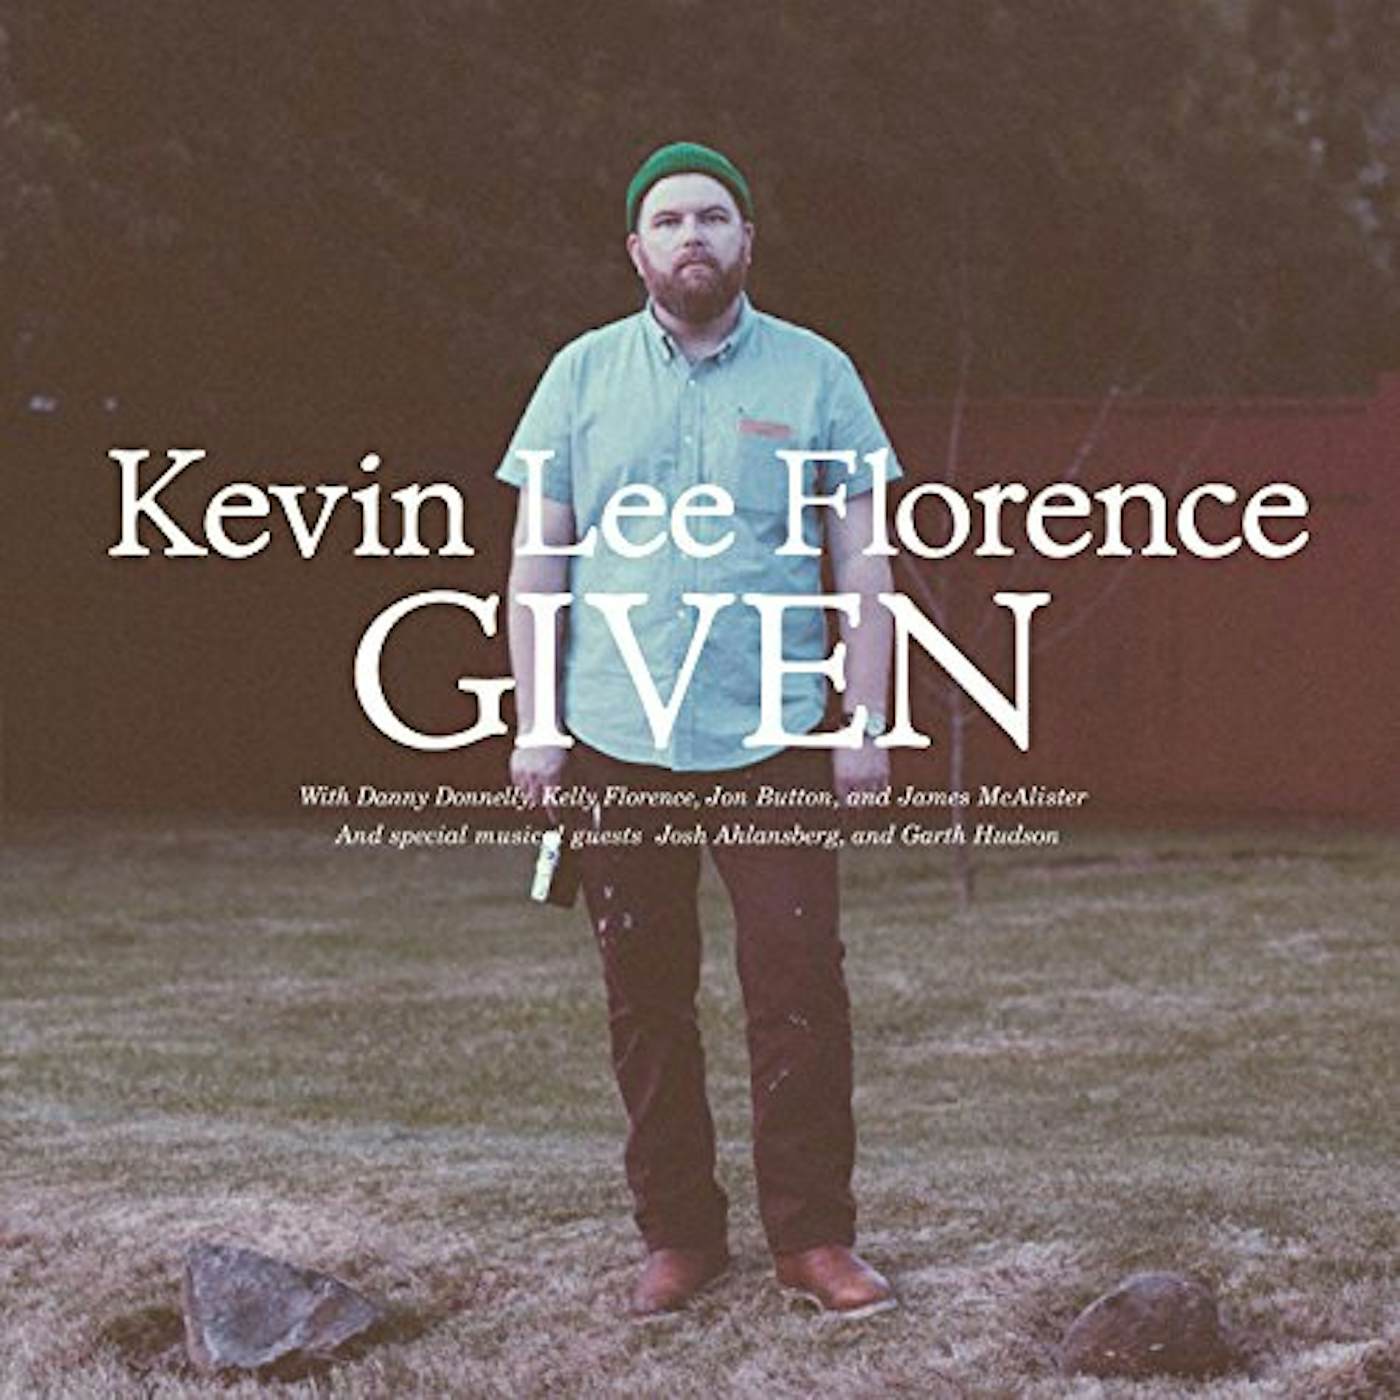 Kevin Lee Florence Given Vinyl Record